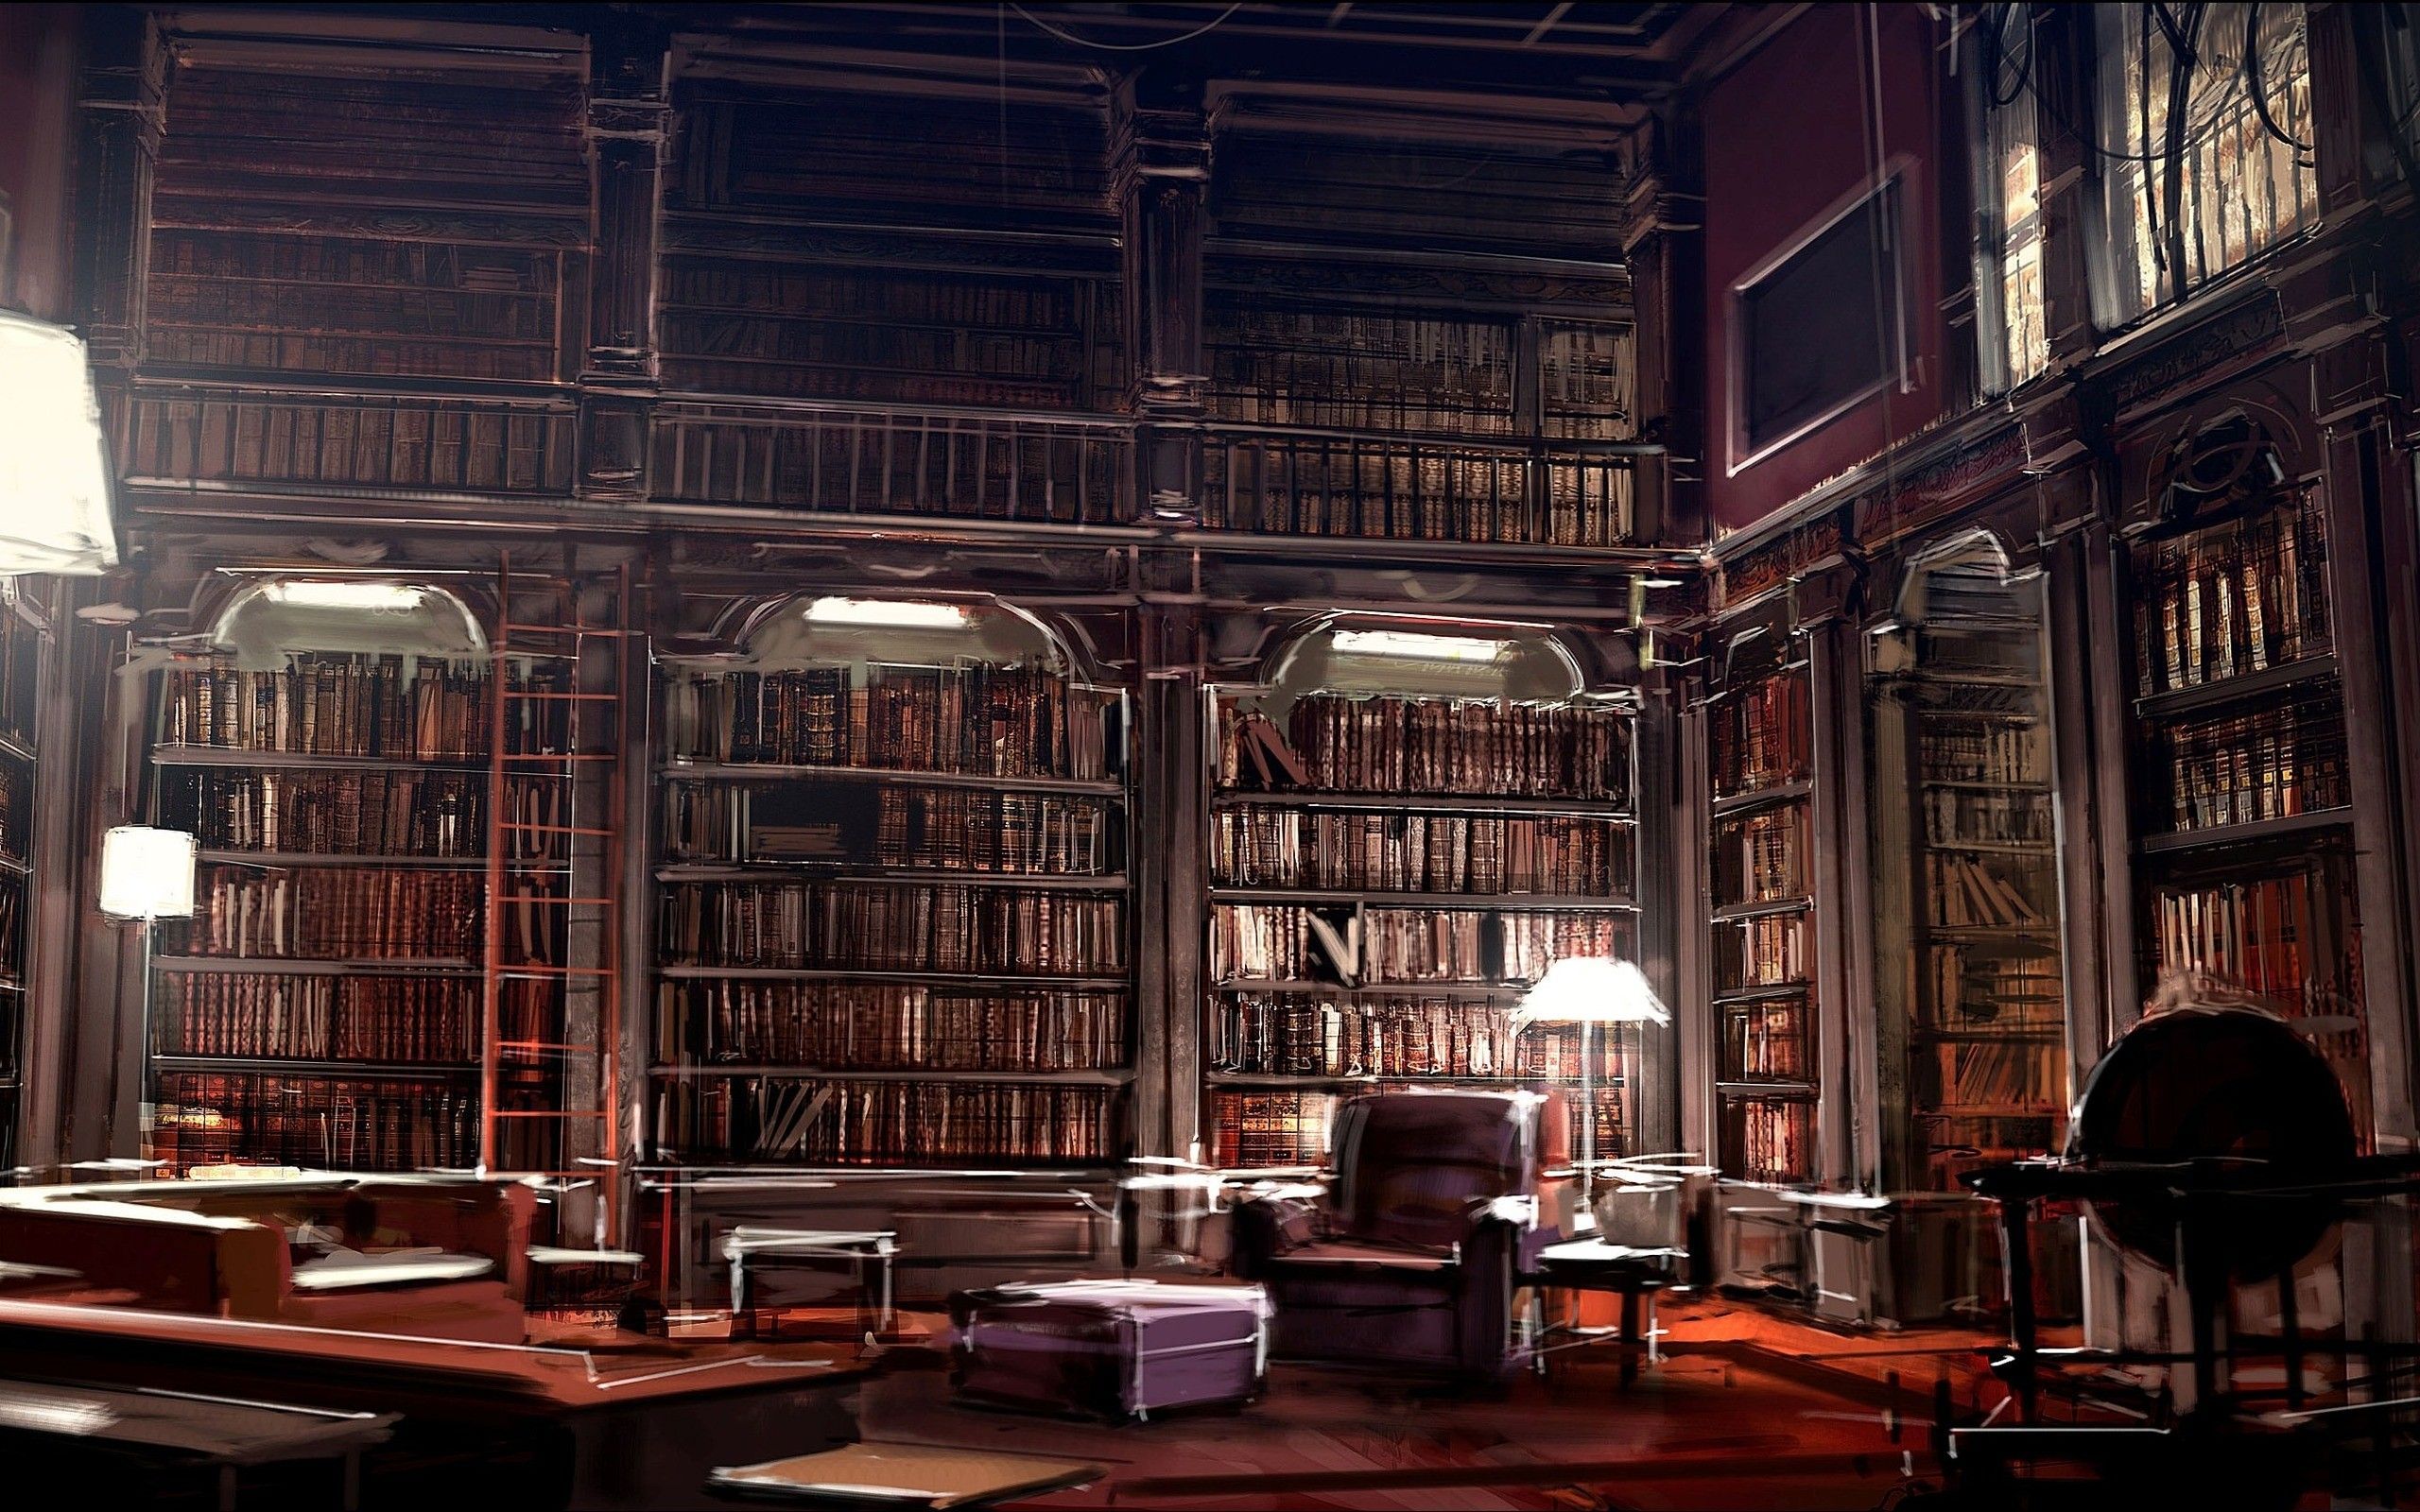 Books to Read Wallpaper: Libraries & Reading Wallpaper. Old libraries, Hogwarts library, Home library design